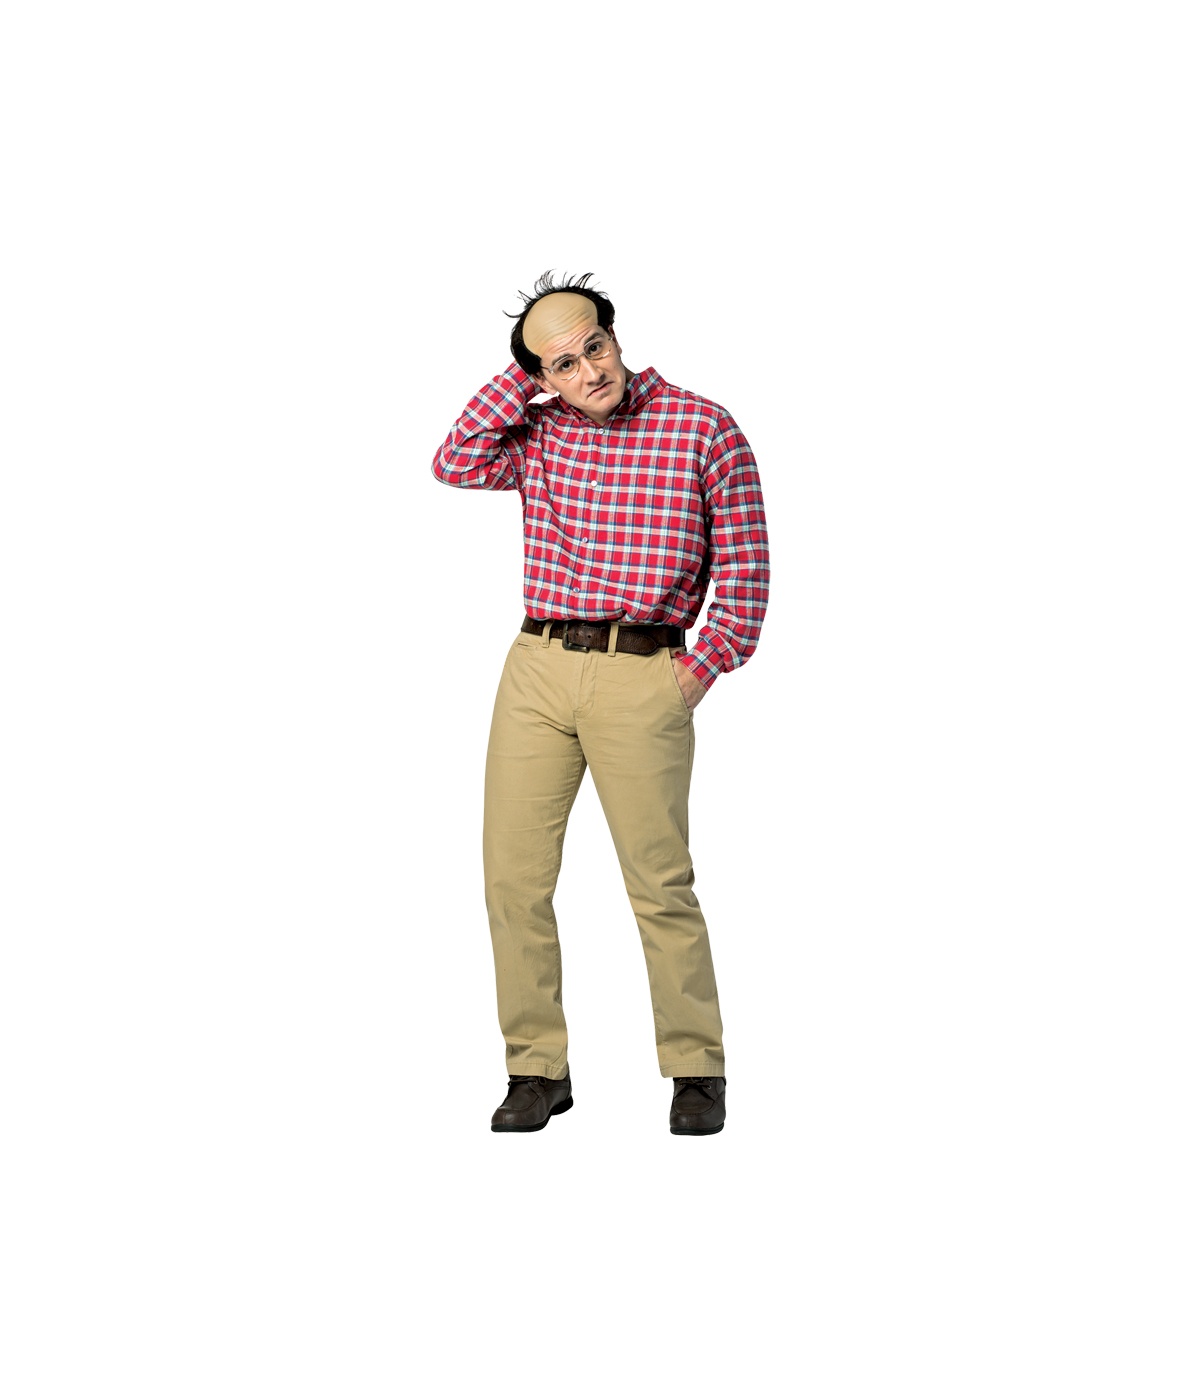  Mens From Seinfeld Costume